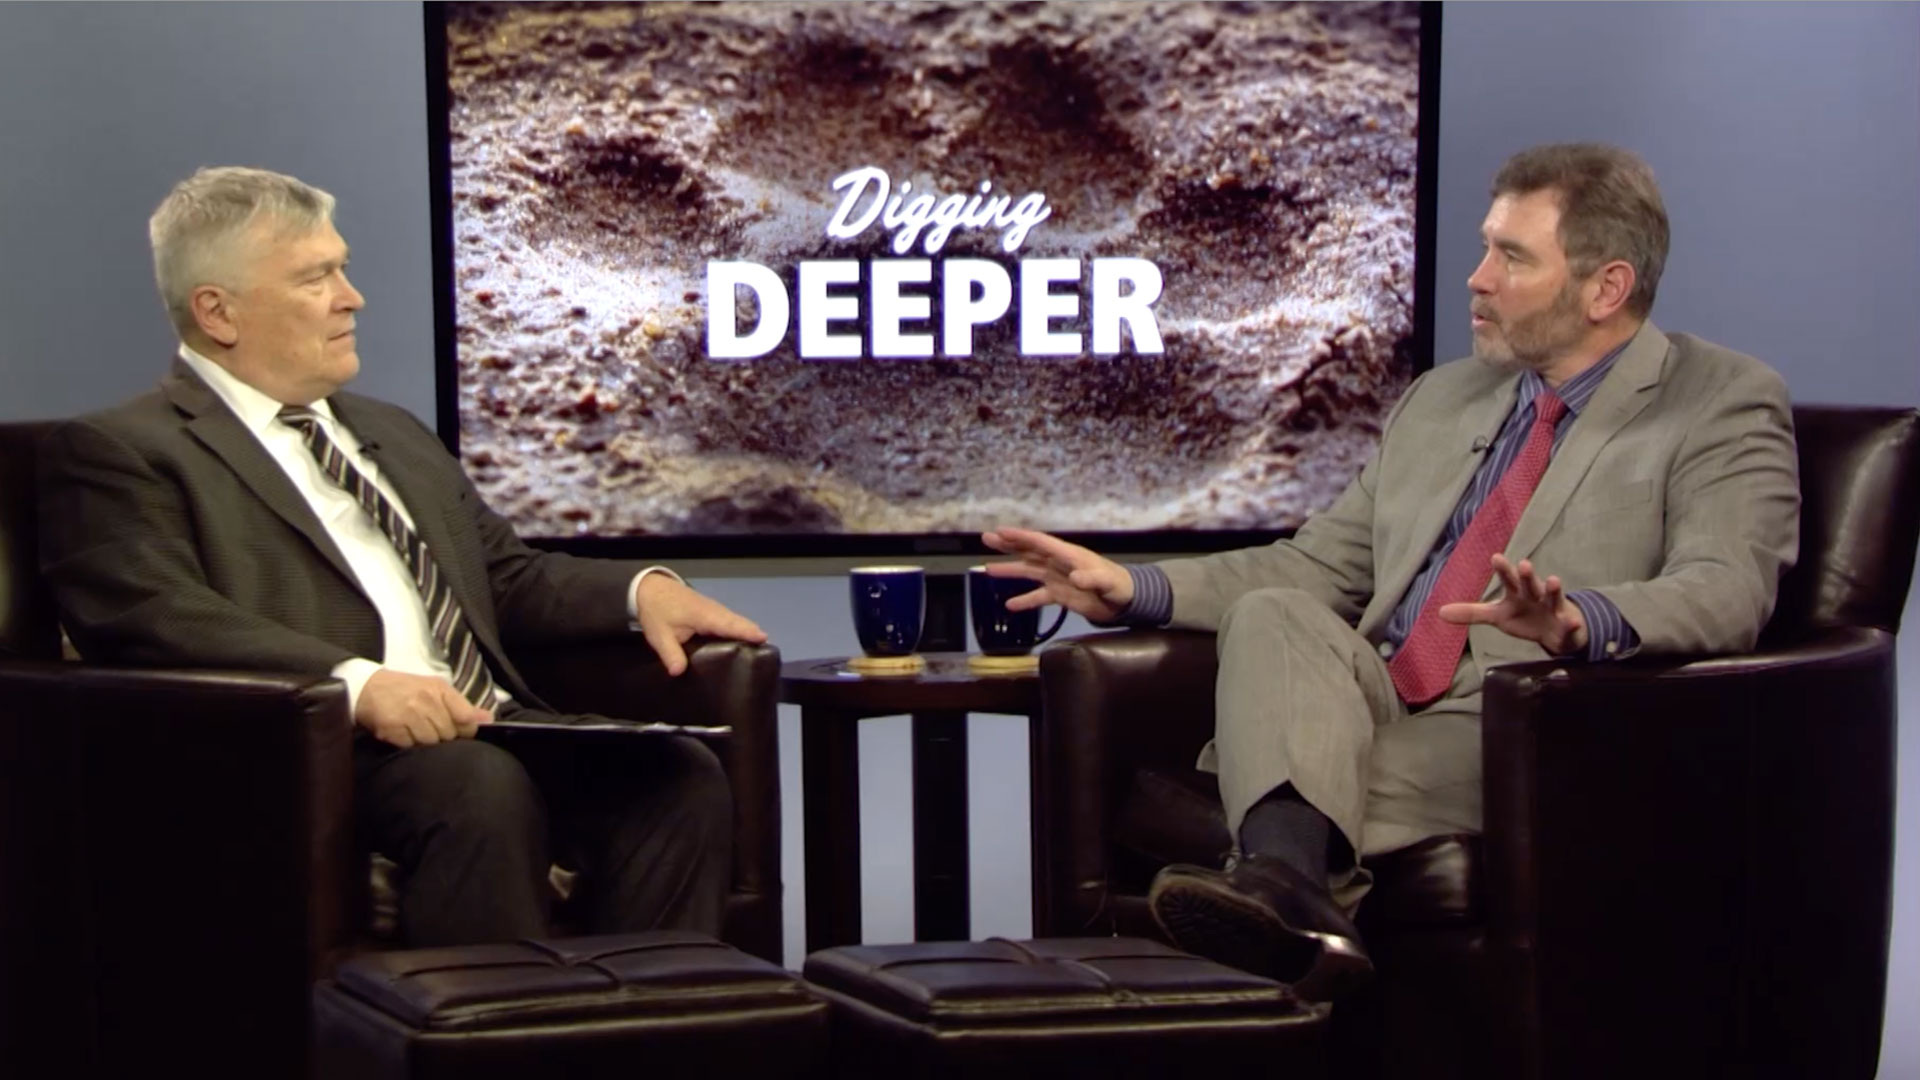 Eric Barron and Dennis Davin on the set of Digging Deeper